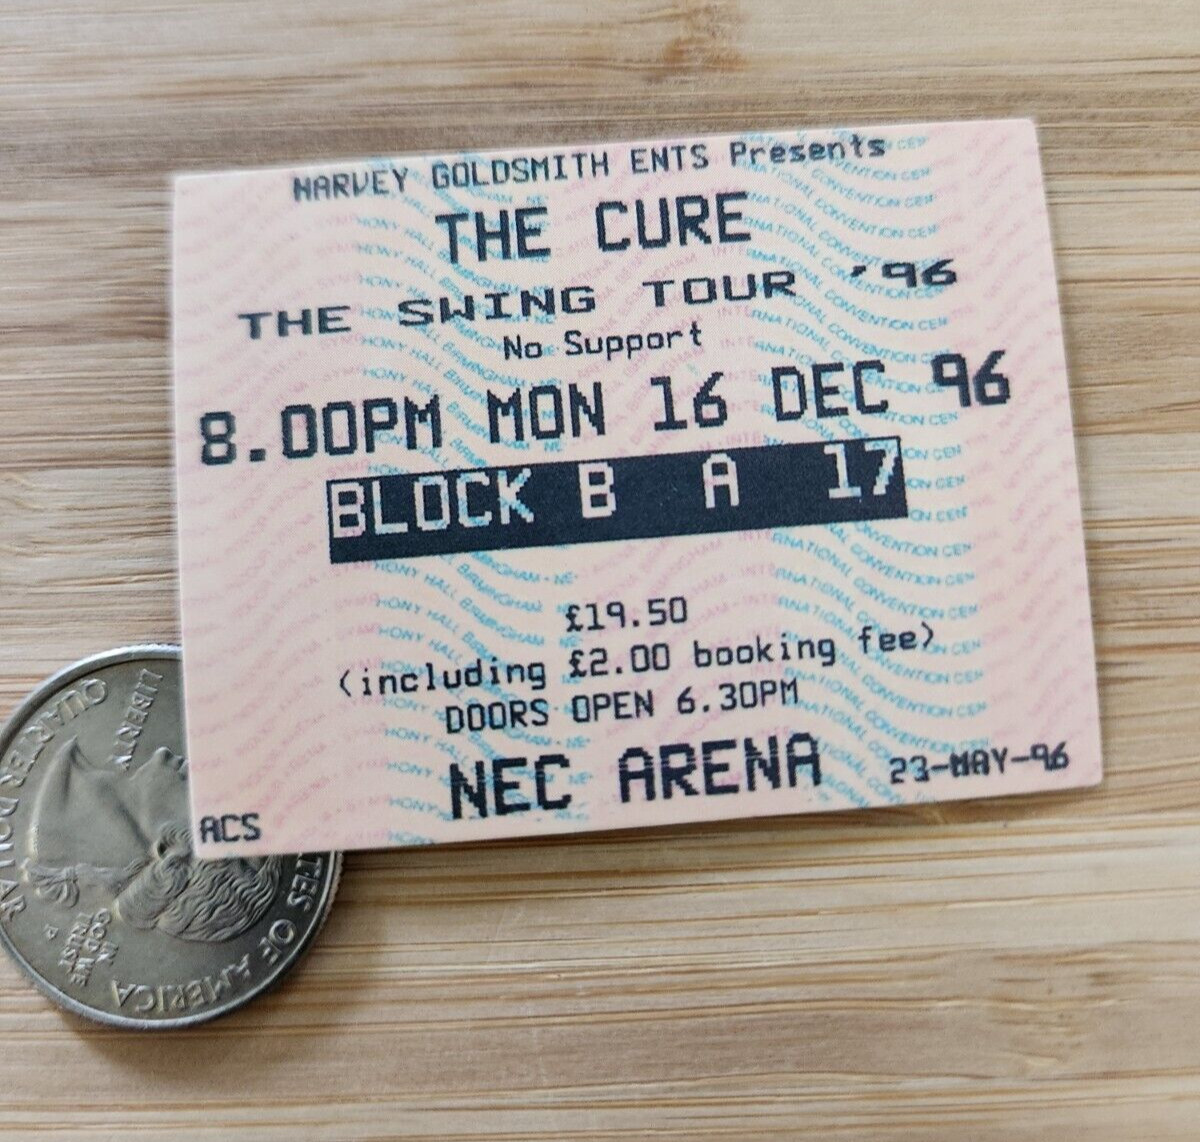 THE CURE STICKER The Cure Ticket Stub Sticker Concert 1996 NEC Arena England